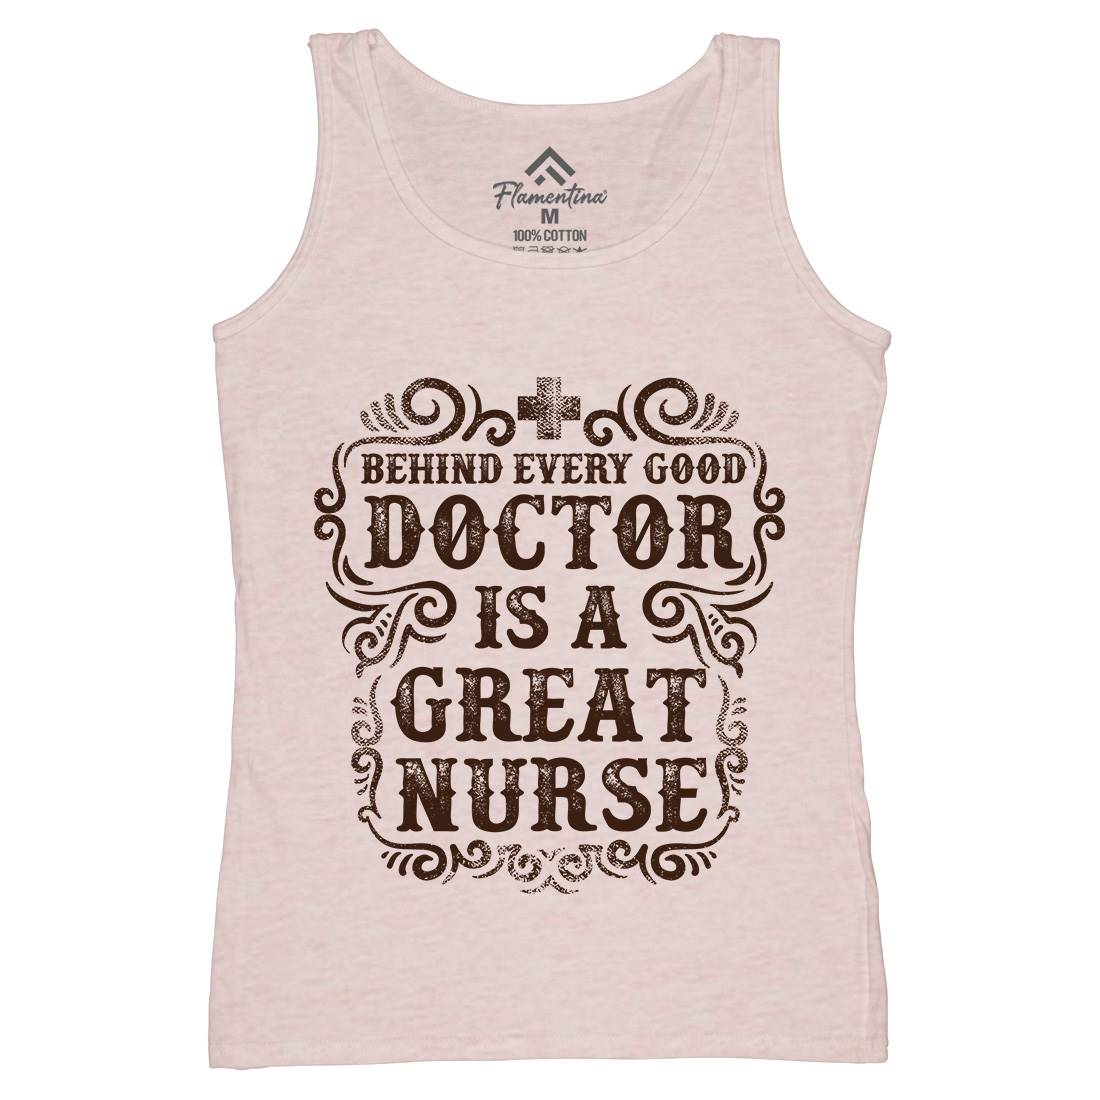 Behind Every Good Doctor Is A Great Nurse Womens Organic Tank Top Vest Work C910